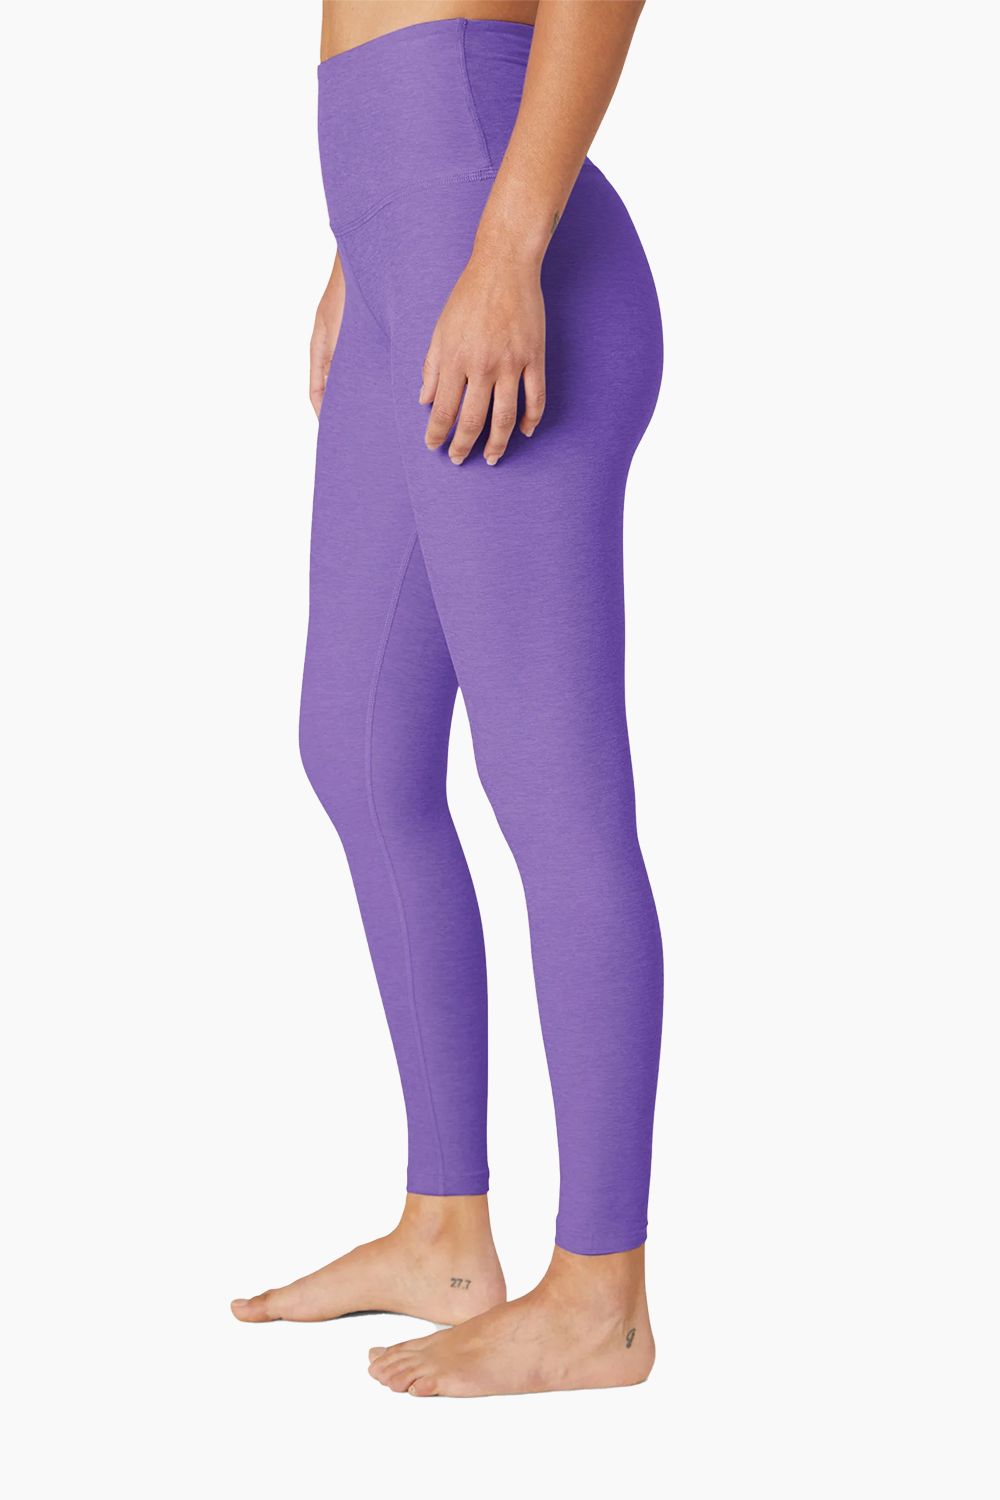 Beyond Yoga Spacedye Caught In The Midi High Waisted Legging in Bright Amethyst